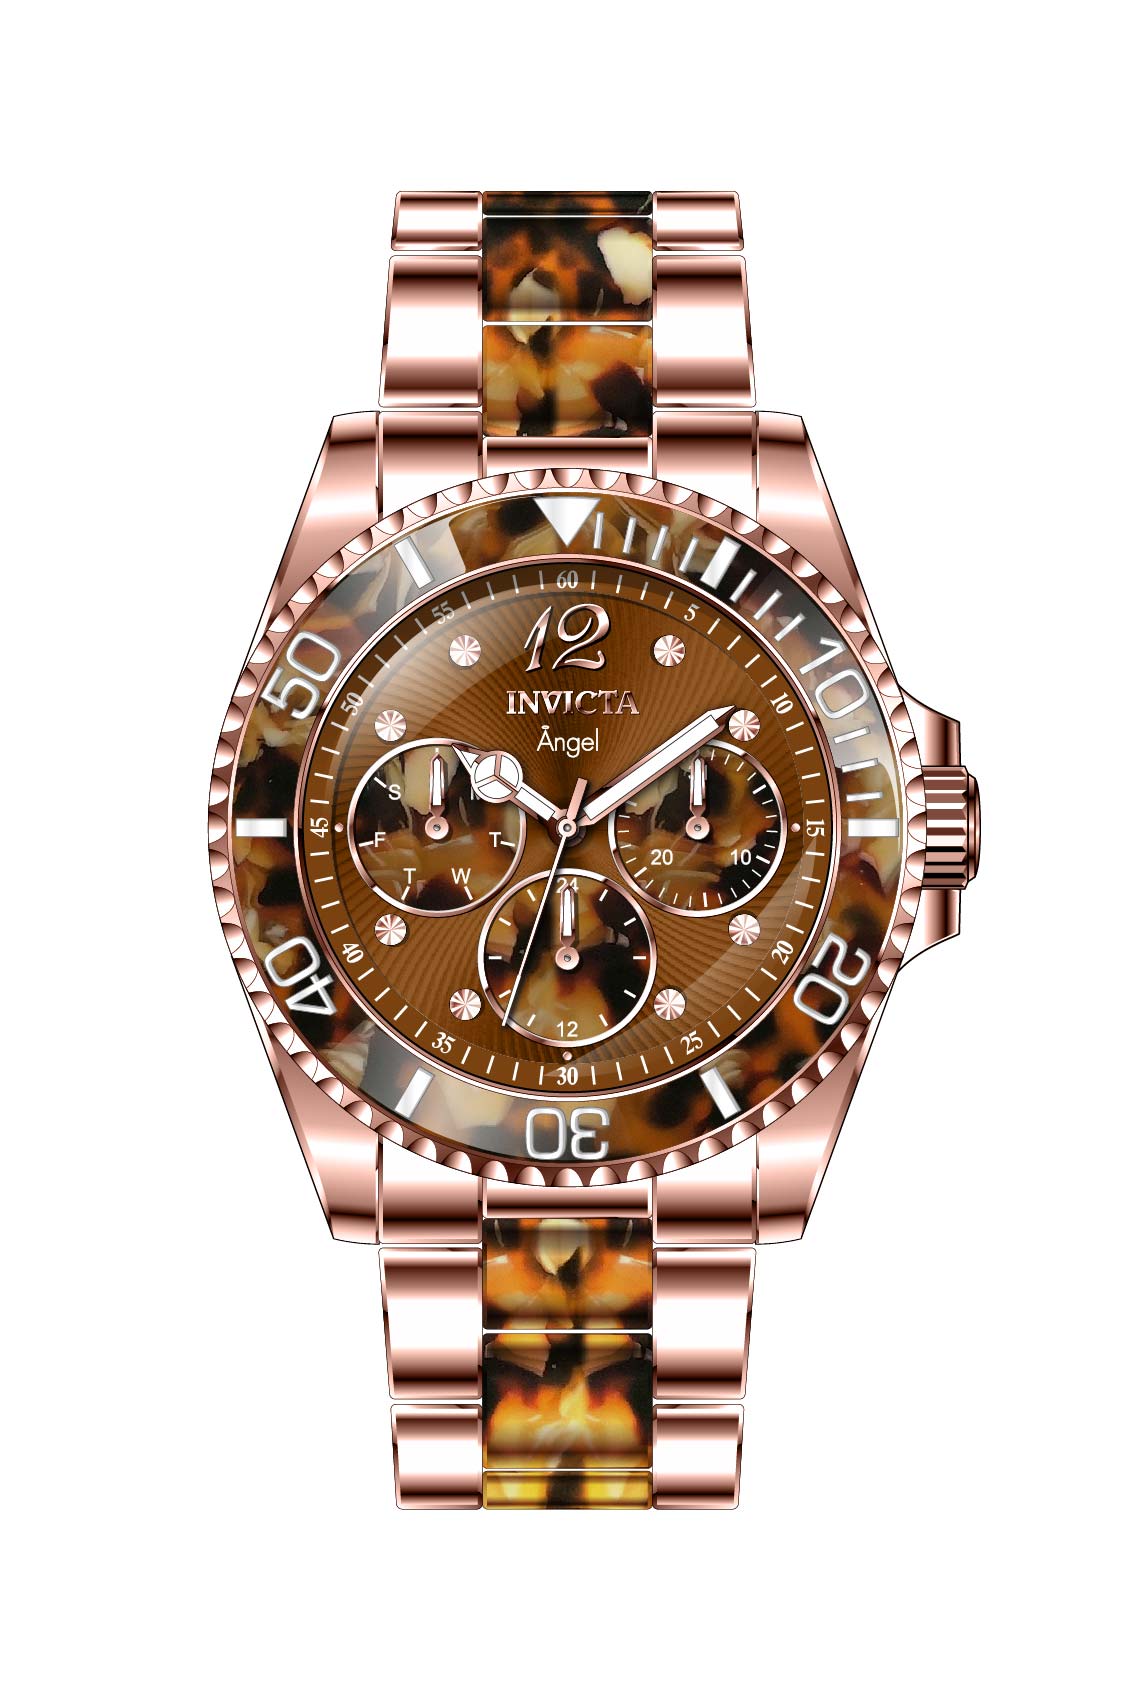 Band for Invicta Angel Lady 32536